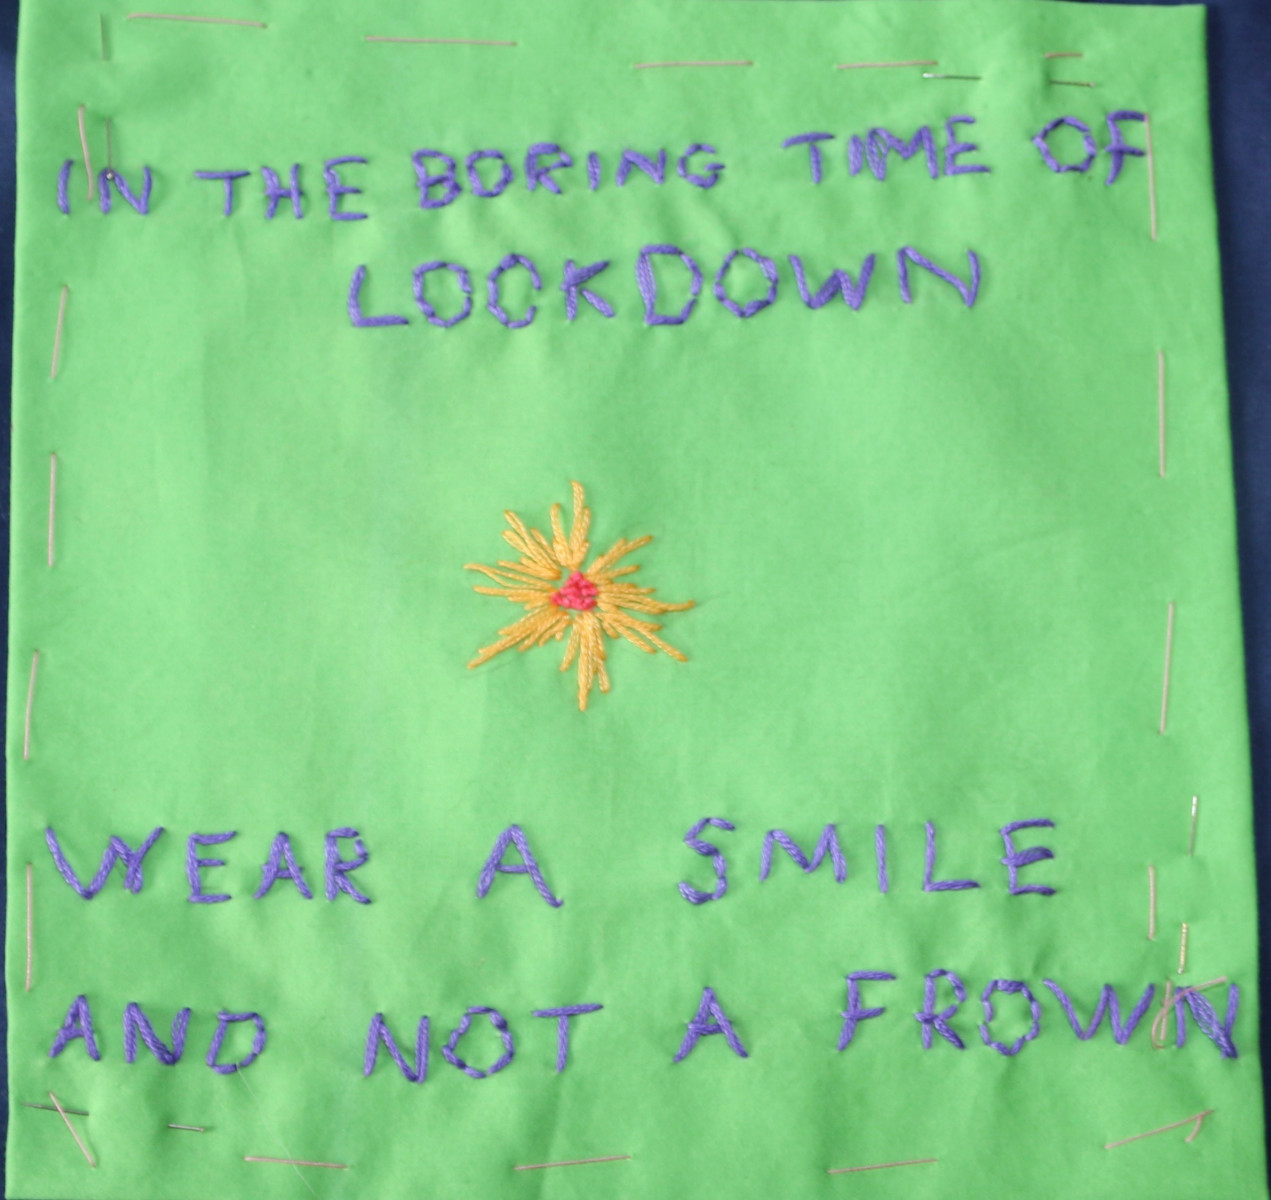 Embroidery saying: In the boring time of lockdown wear a smile and not a frown